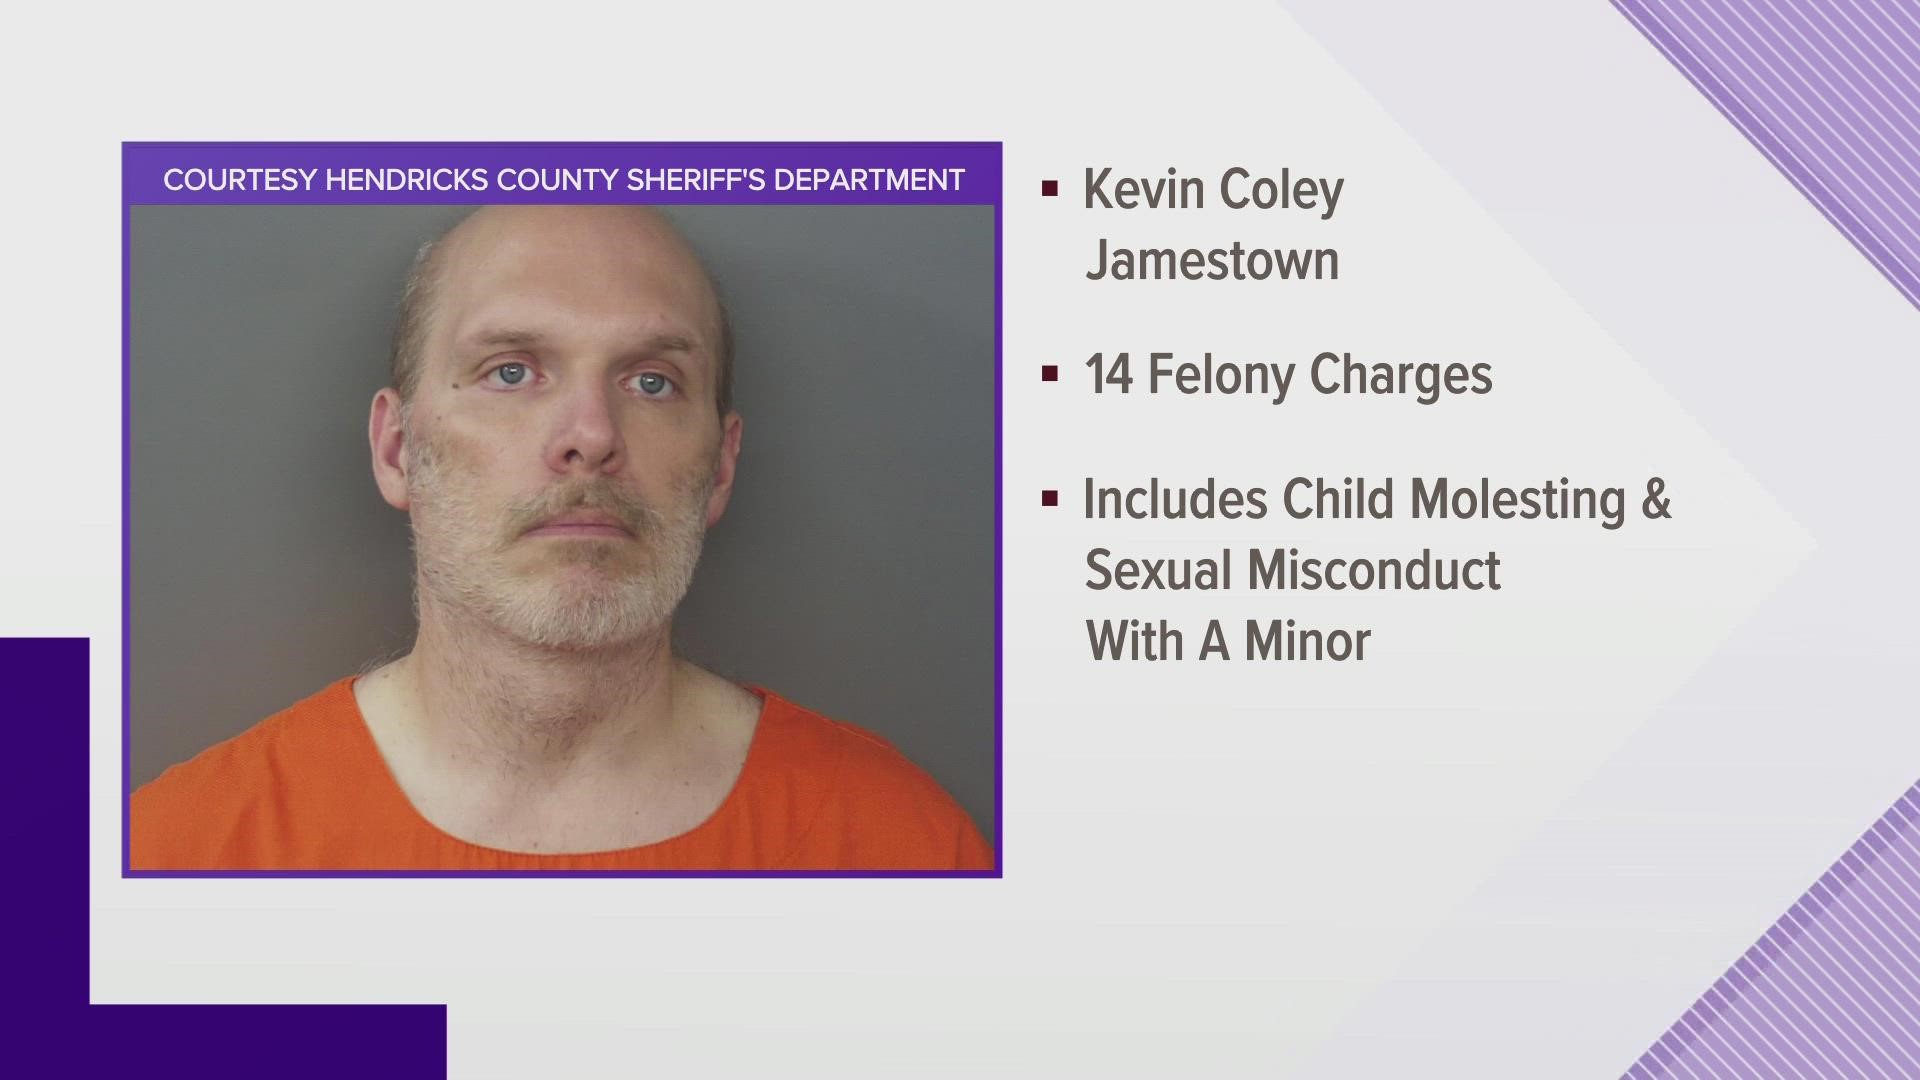 Kevin Coley is charged with vicarious sexual conduct child molesting and sexual misconduct with a minor.